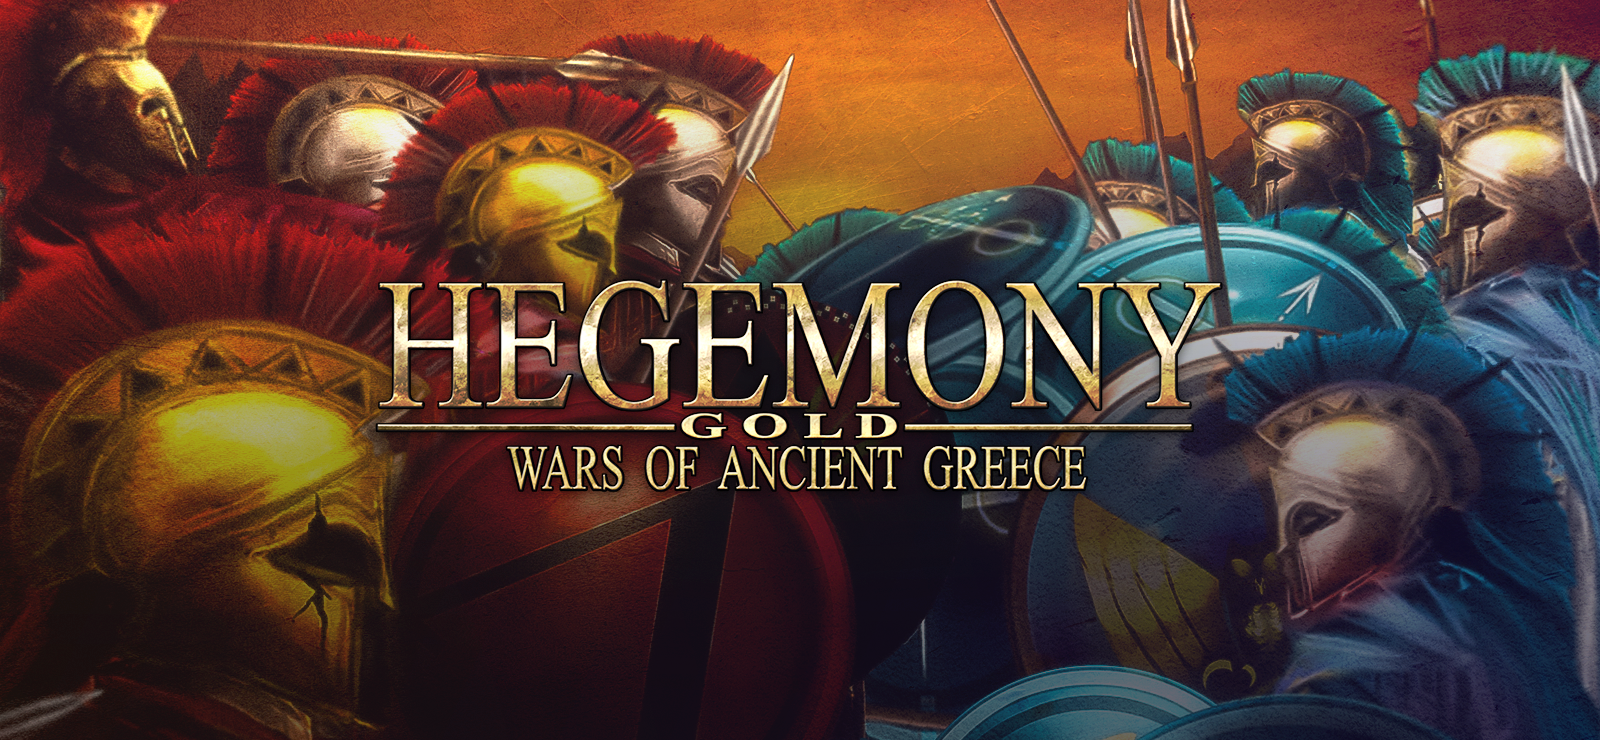 Hegemony Gold: Wars Of Ancient Greece